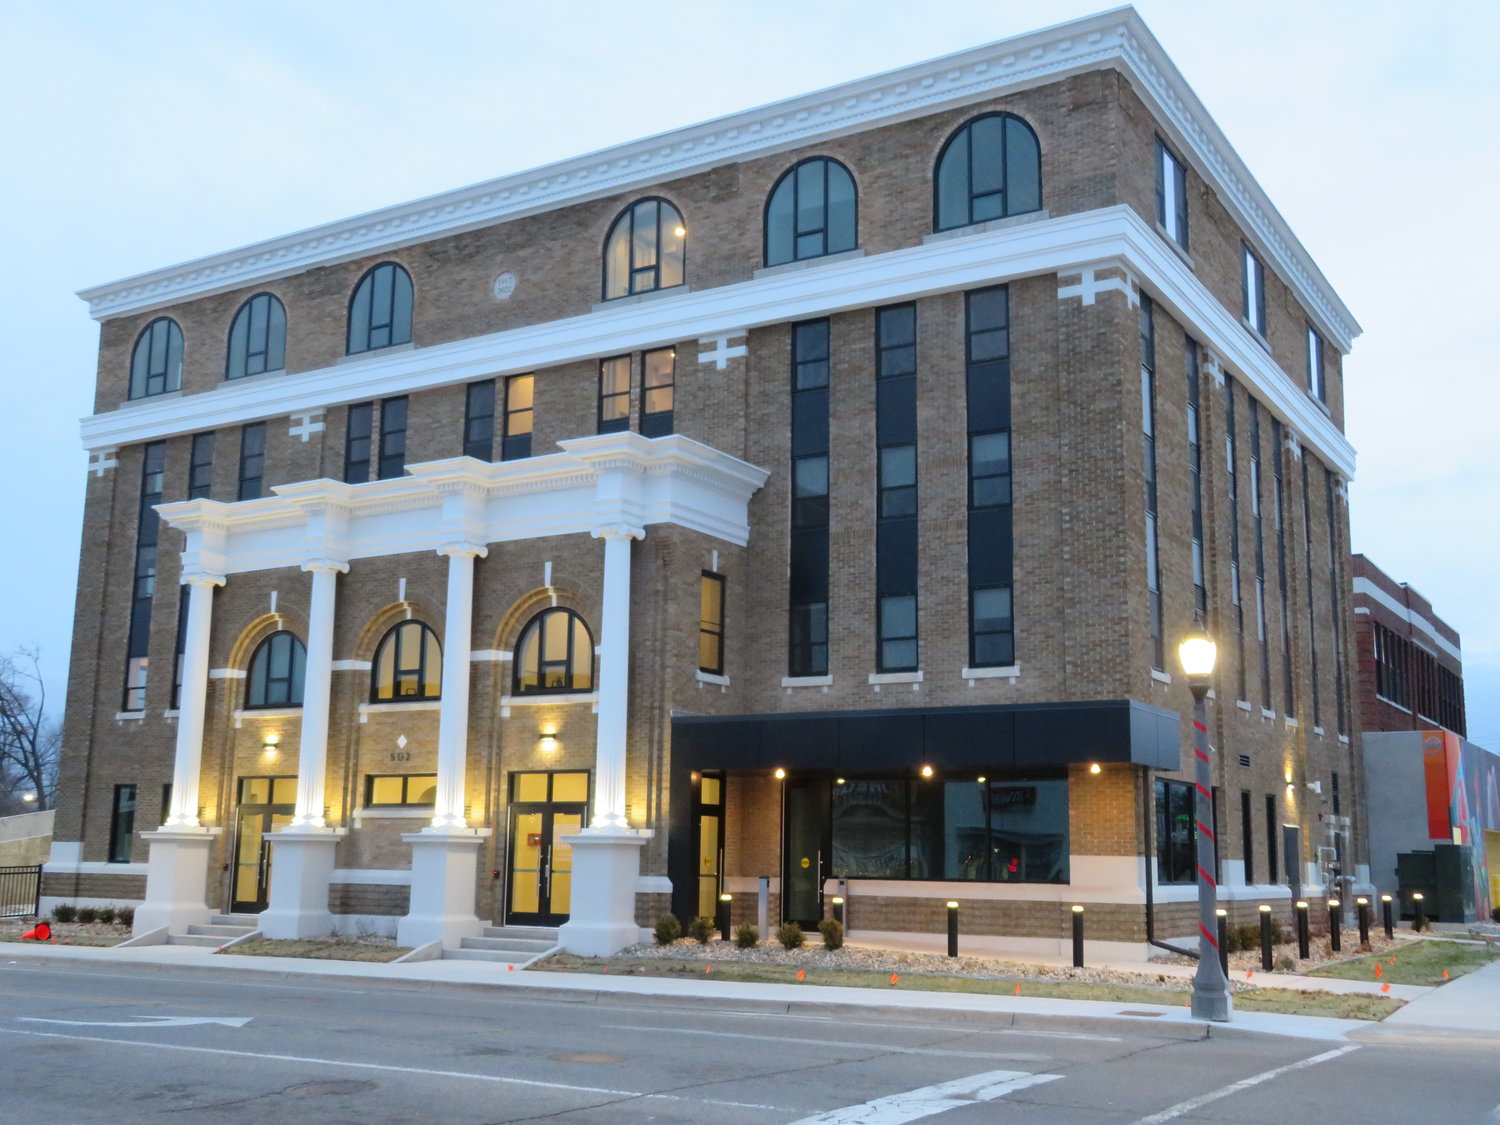 The Temple Lofts open officially Monday with 31 living units, ranging from studio apartments to two-bedroom suites. In 2023, the first floor will house the offices of project developer Michigan Community Capital and an expanded-menu Strange Matter cafe.